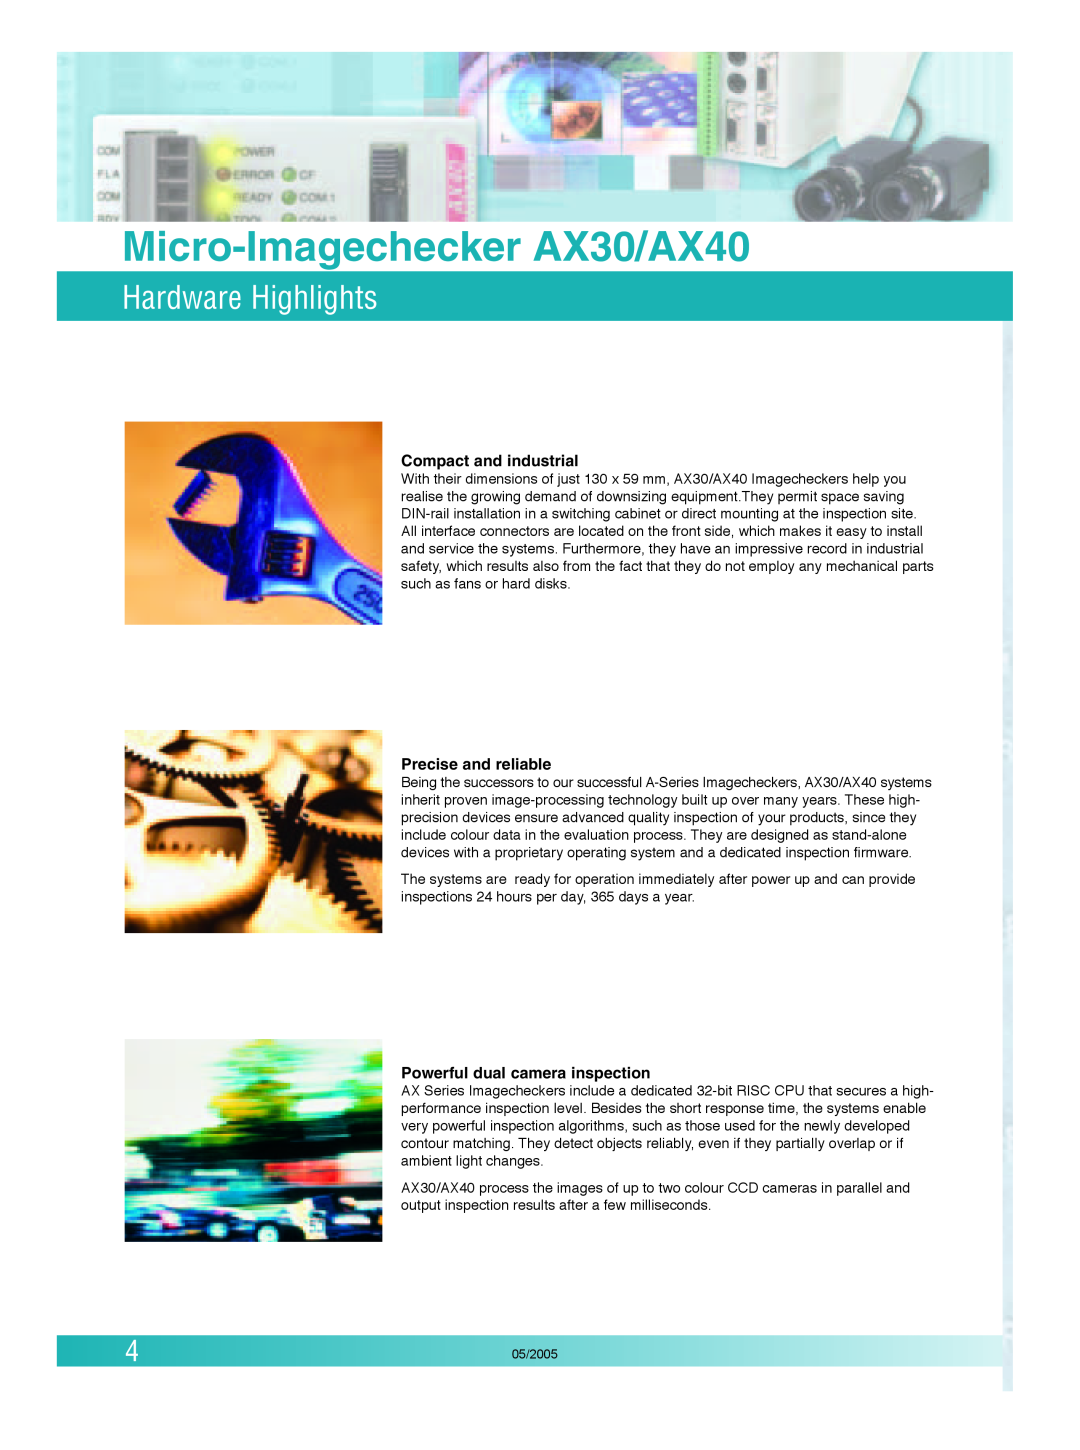 Panasonic manual Hardware Highlights, Micro-Imagechecker AX30/AX40, Compact and industrial, Precise and reliable 